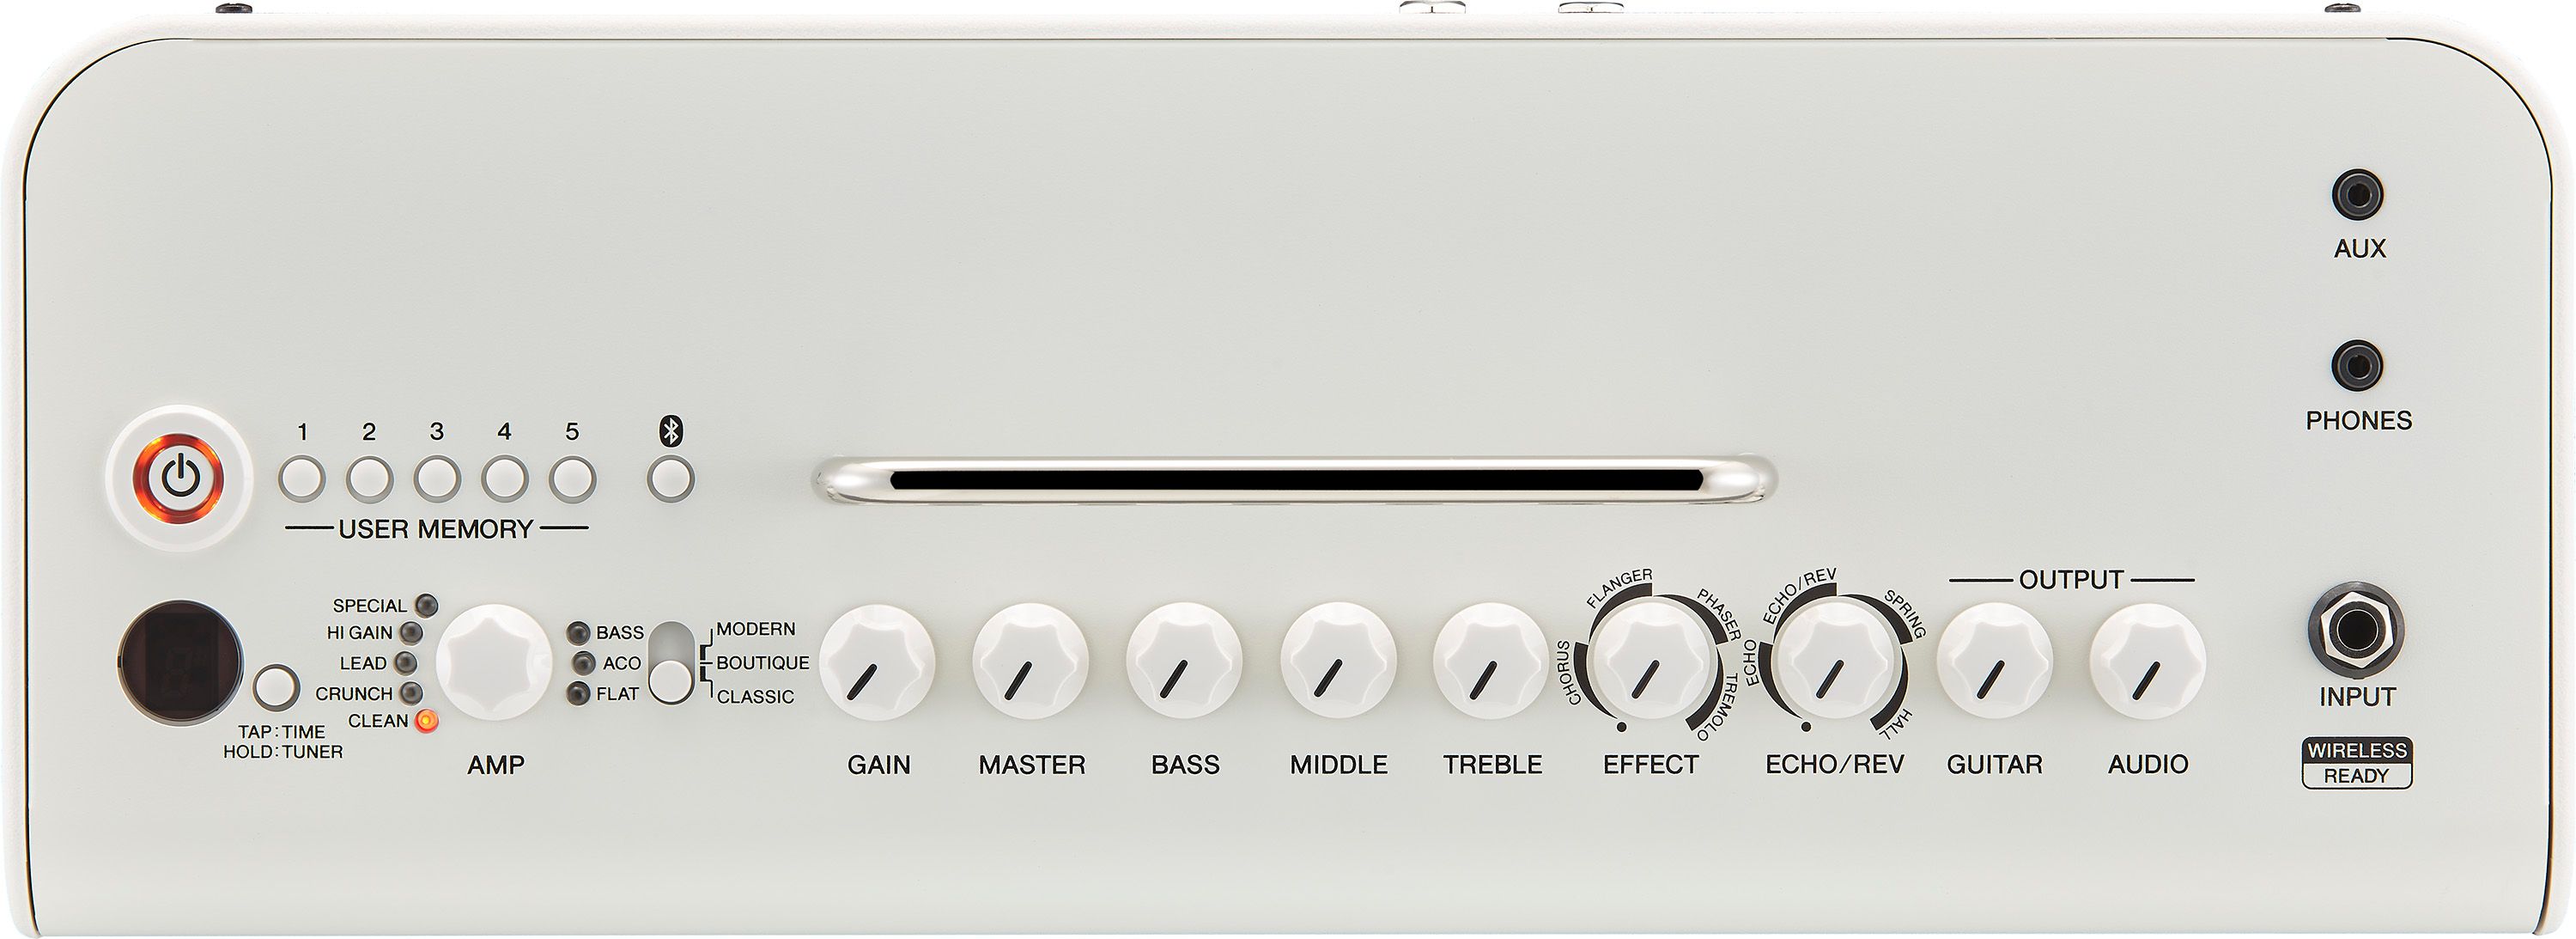 Yamaha Thr30 Ii White Wireless 30w - Electric guitar preamp in rack - Variation 4